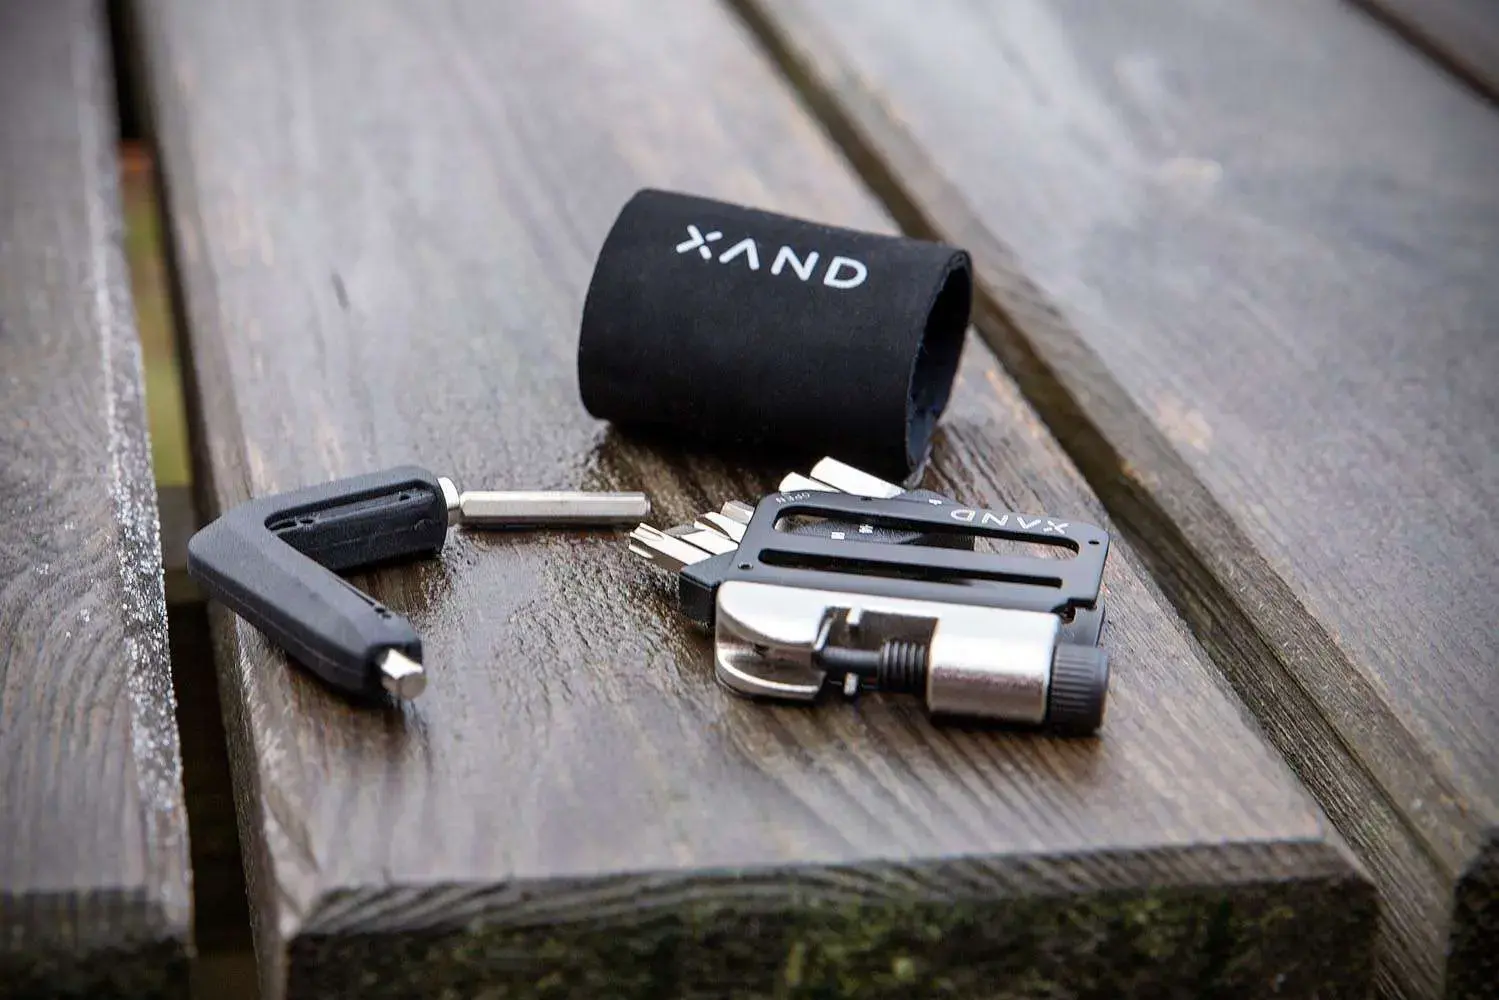 XAND Multitool 8 in 1